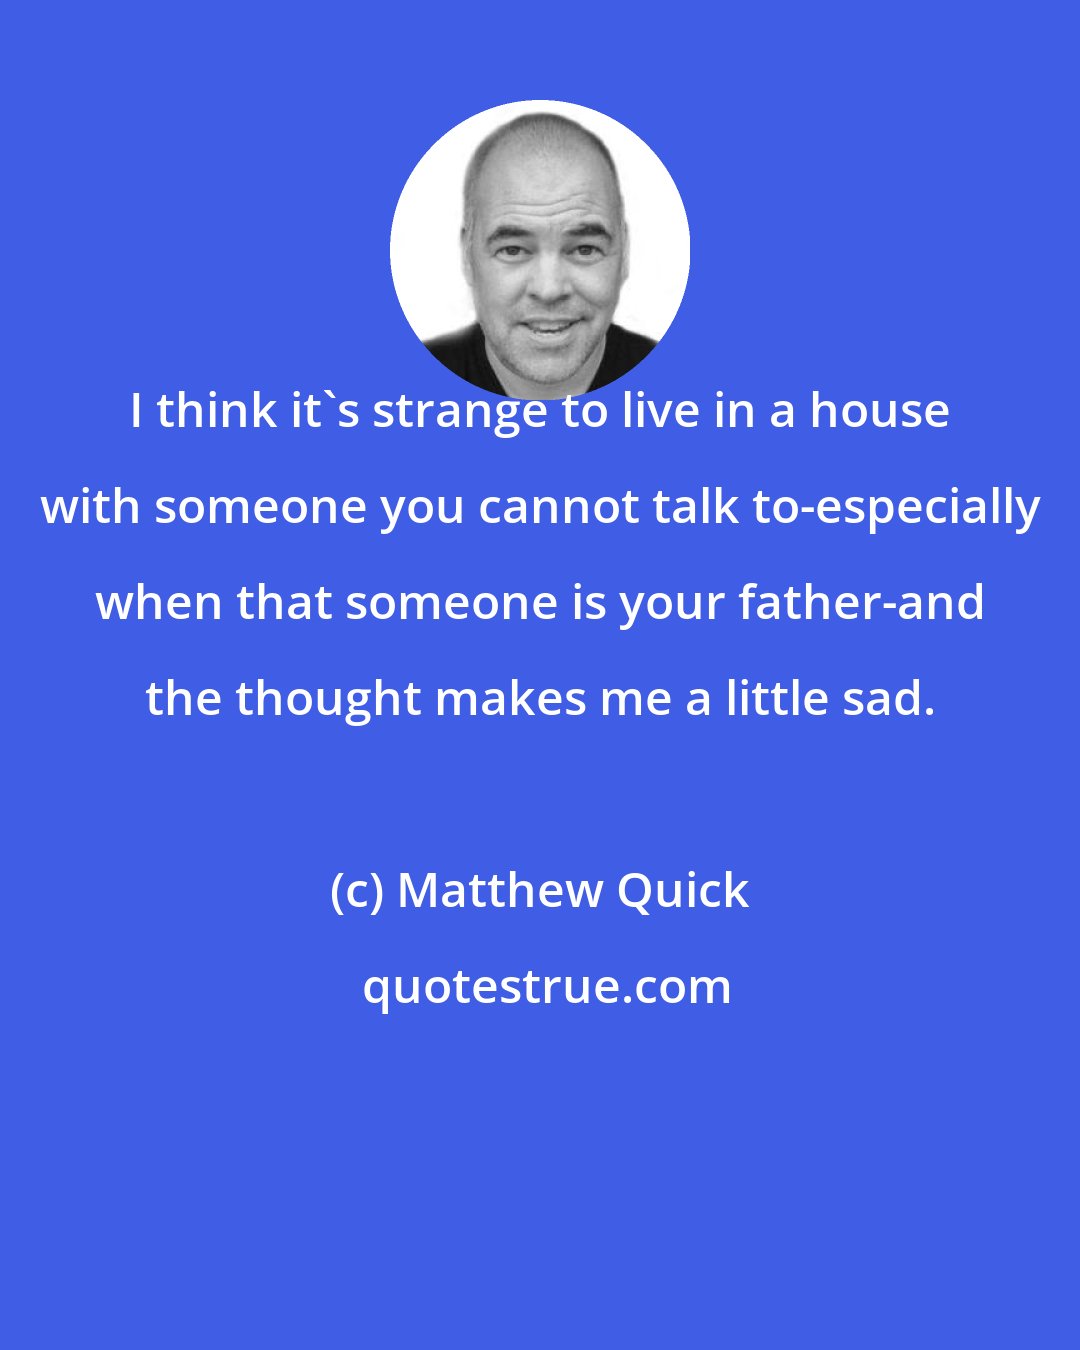 Matthew Quick: I think it's strange to live in a house with someone you cannot talk to-especially when that someone is your father-and the thought makes me a little sad.